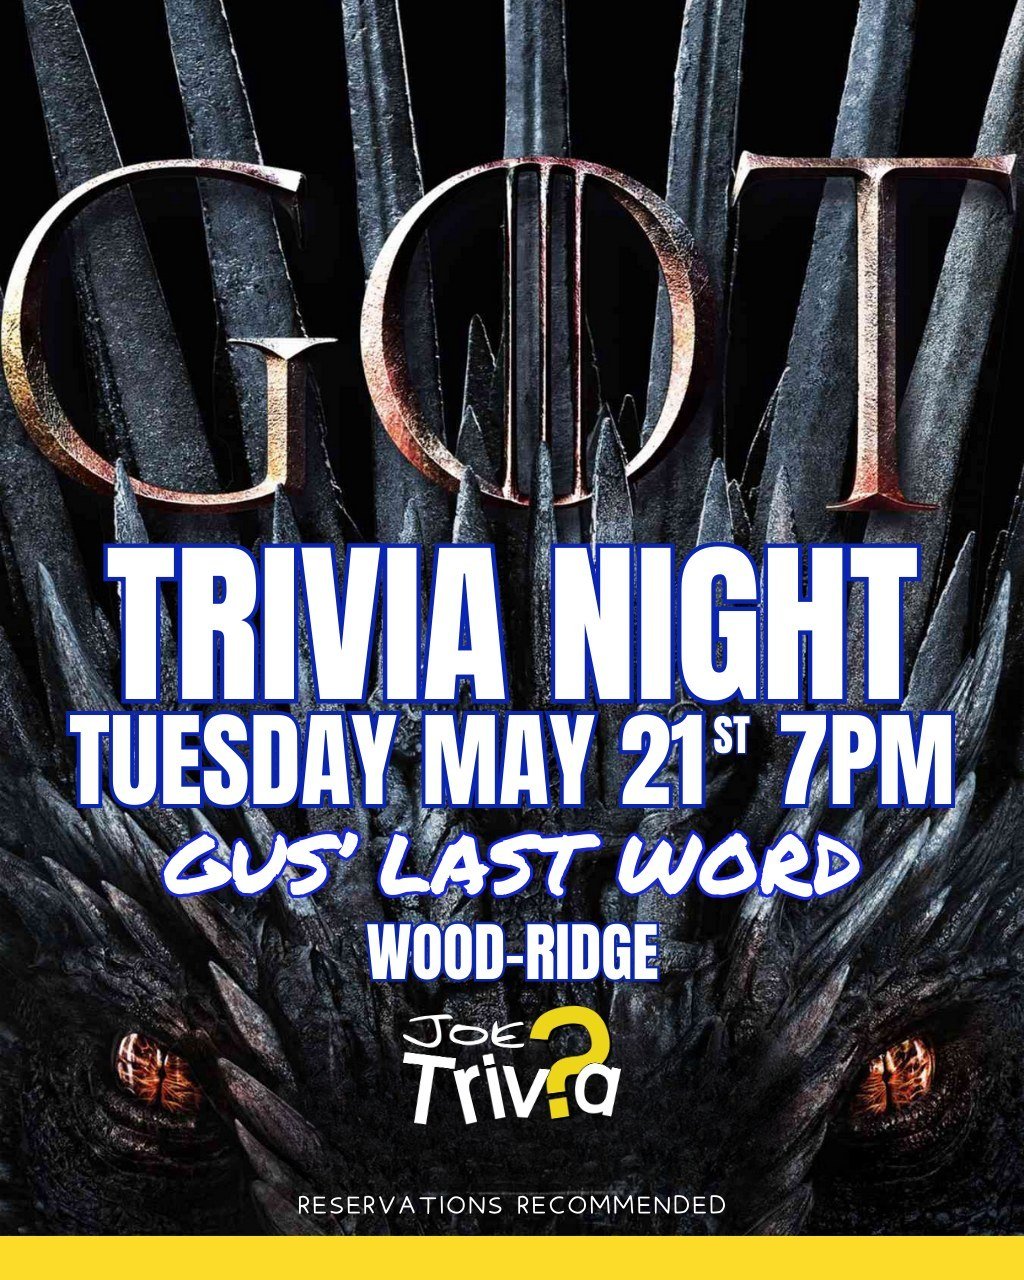 ⚔️ Calling all lords and ladies - are you worthy of sitting on the Iron Throne?! Join us next Tuesday, May 21st at 7pm to test your knowledge of the Seven Kingdoms and compete against fellow fans for honor, glory, and bragging rights. Winter may be o